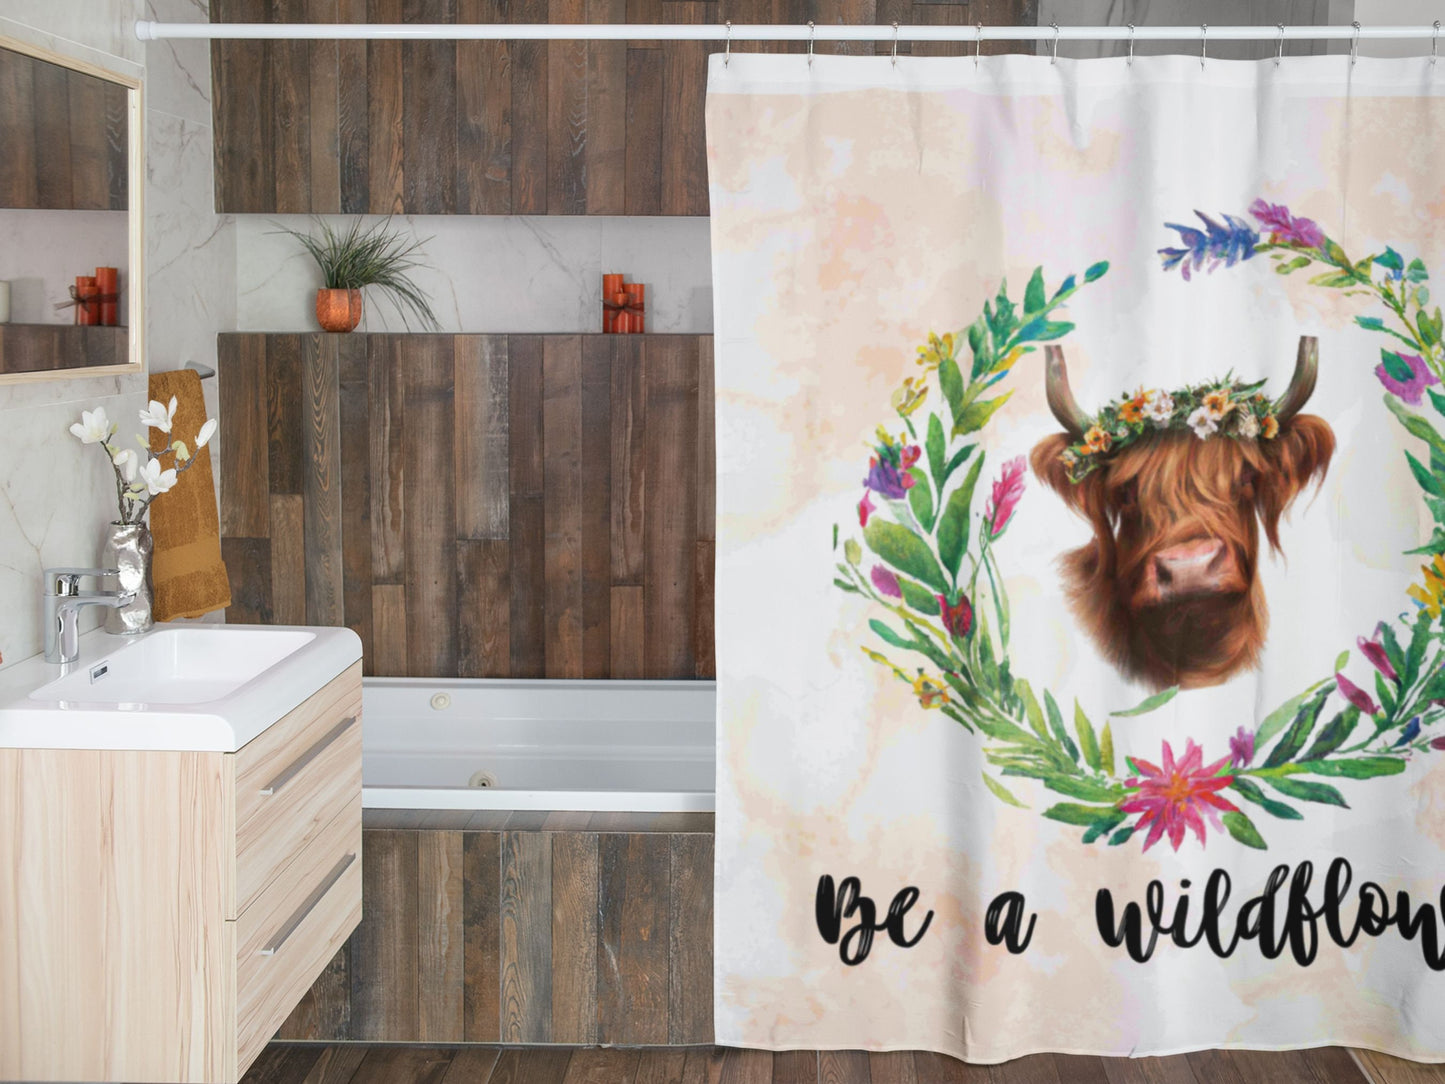 Boho Chic Shower Curtain with Highland Cow and Colorful Wildflowers - Vibrant Bathroom Decor